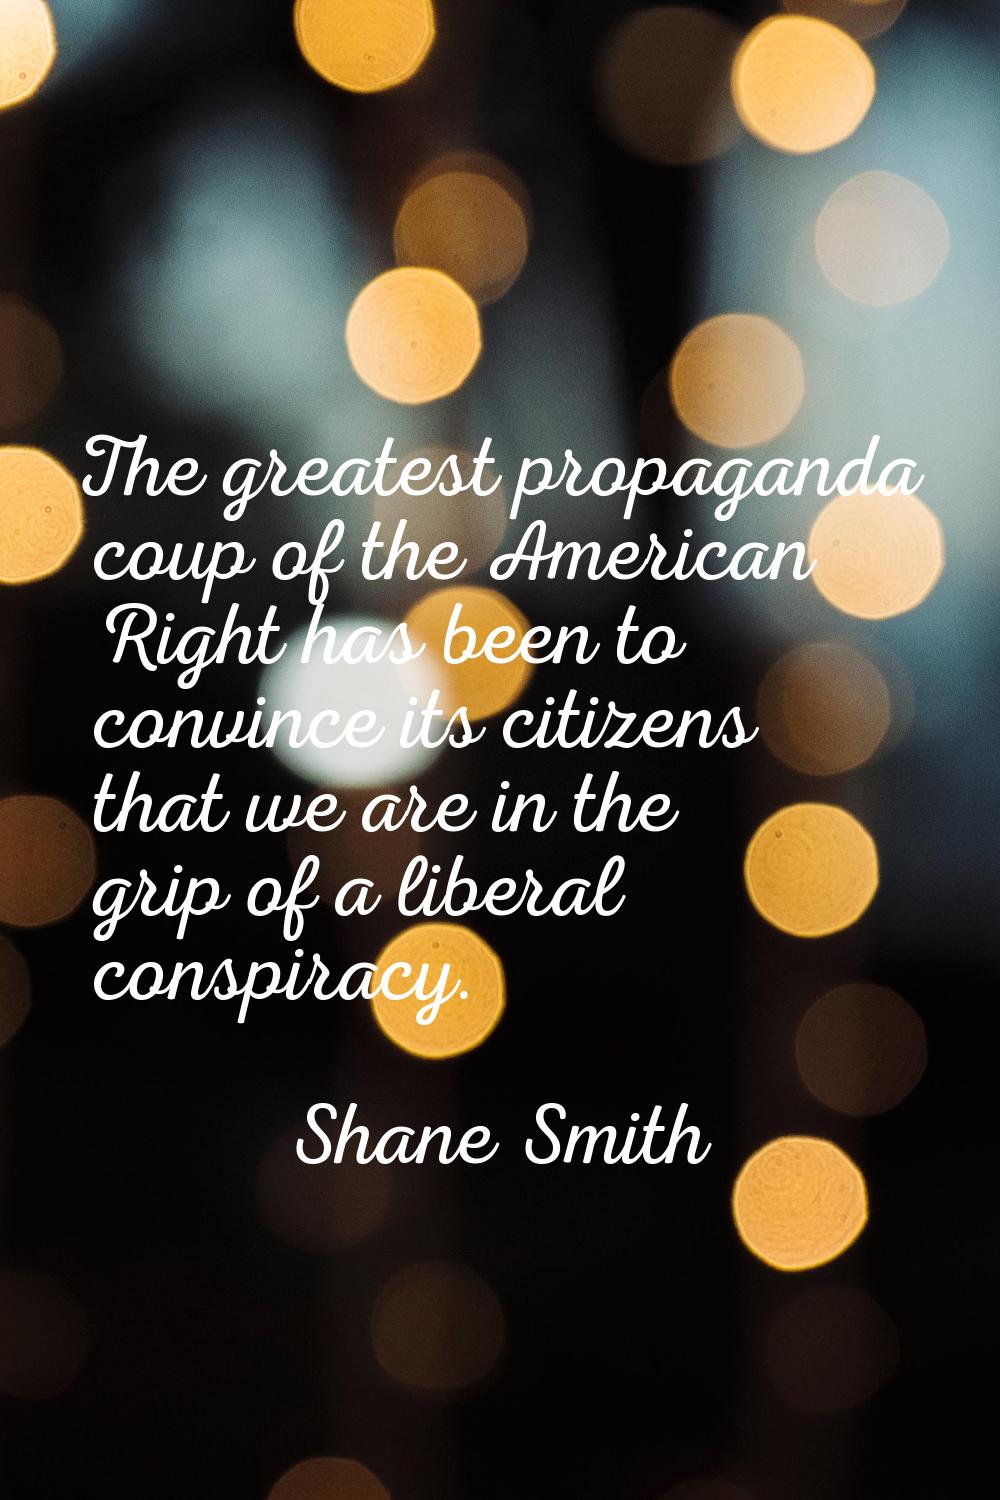 The greatest propaganda coup of the American Right has been to convince its citizens that we are in